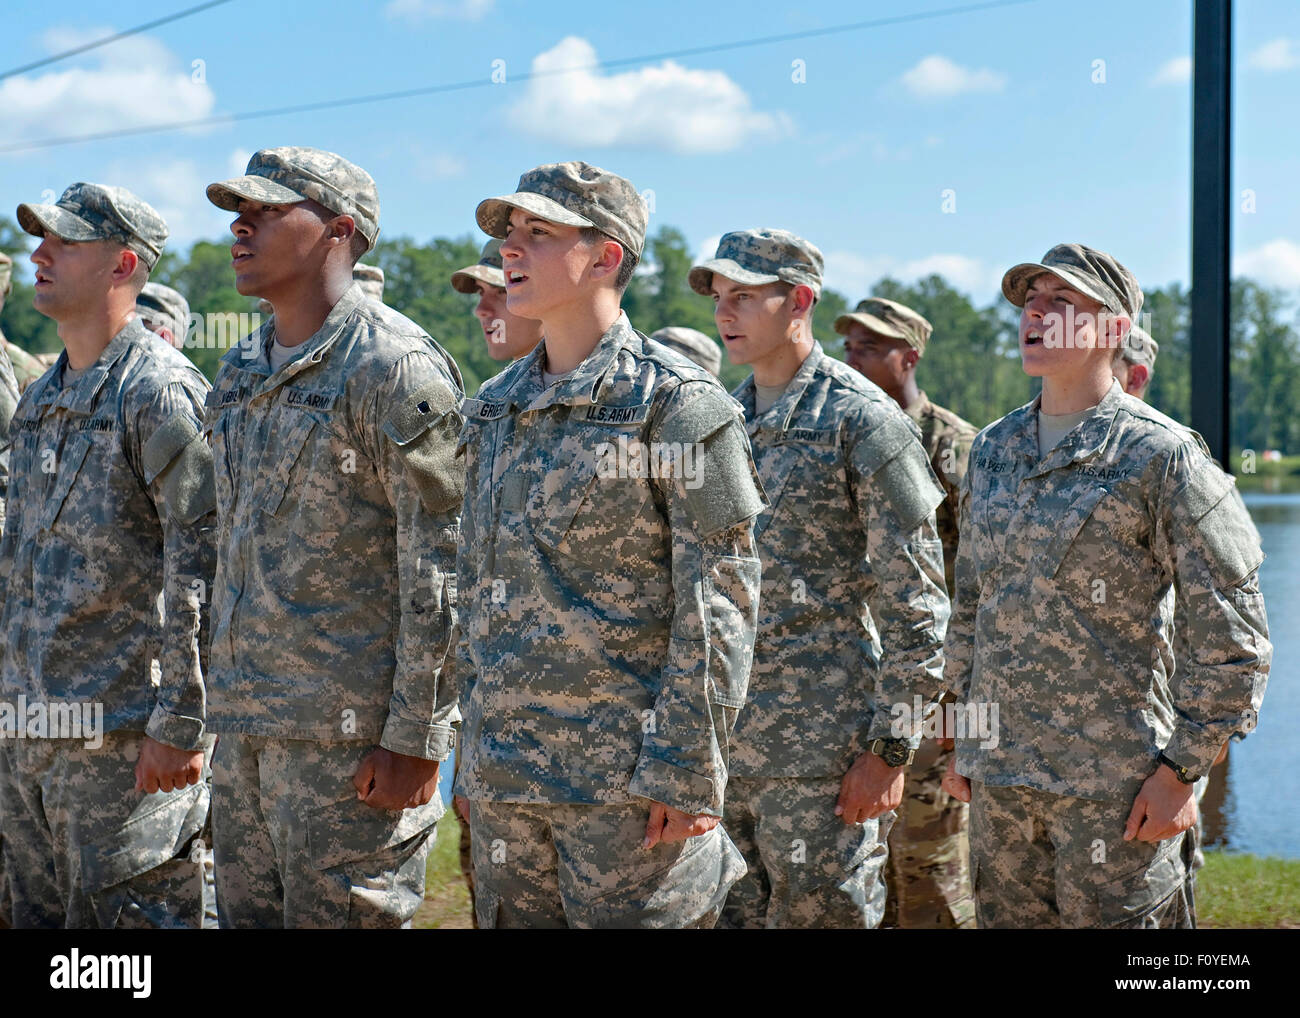 U.S. Army Captain Kristen Griest , left, and fellow soldier 1st Lt Shaye Haver, center, during ceremonies as they become the first women to graduate from Army Ranger school August 21, 2015 at Fort Benning, Georgia. Stock Photo